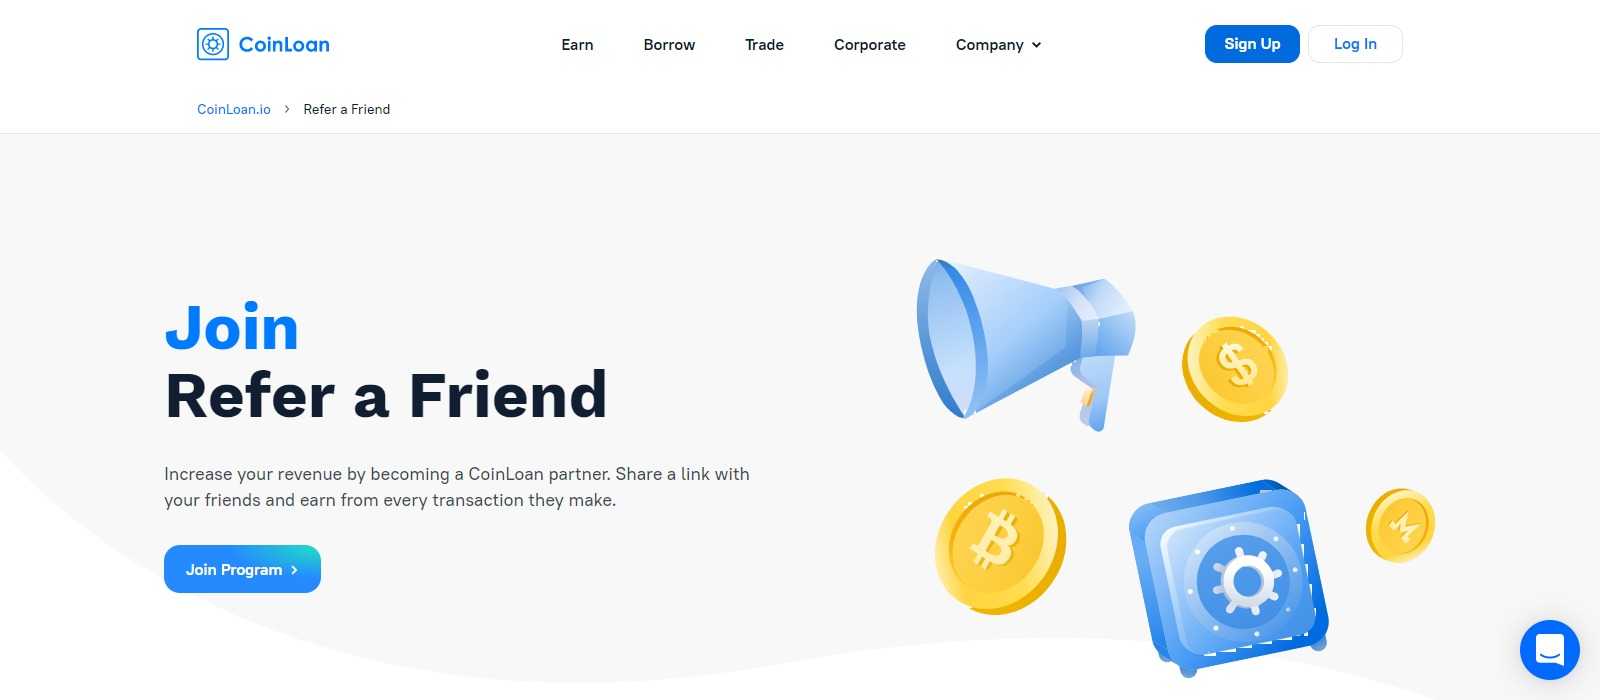 CoinLoan Affiliate Program Review: Get Earn 0.2% of Every Exchange Amount